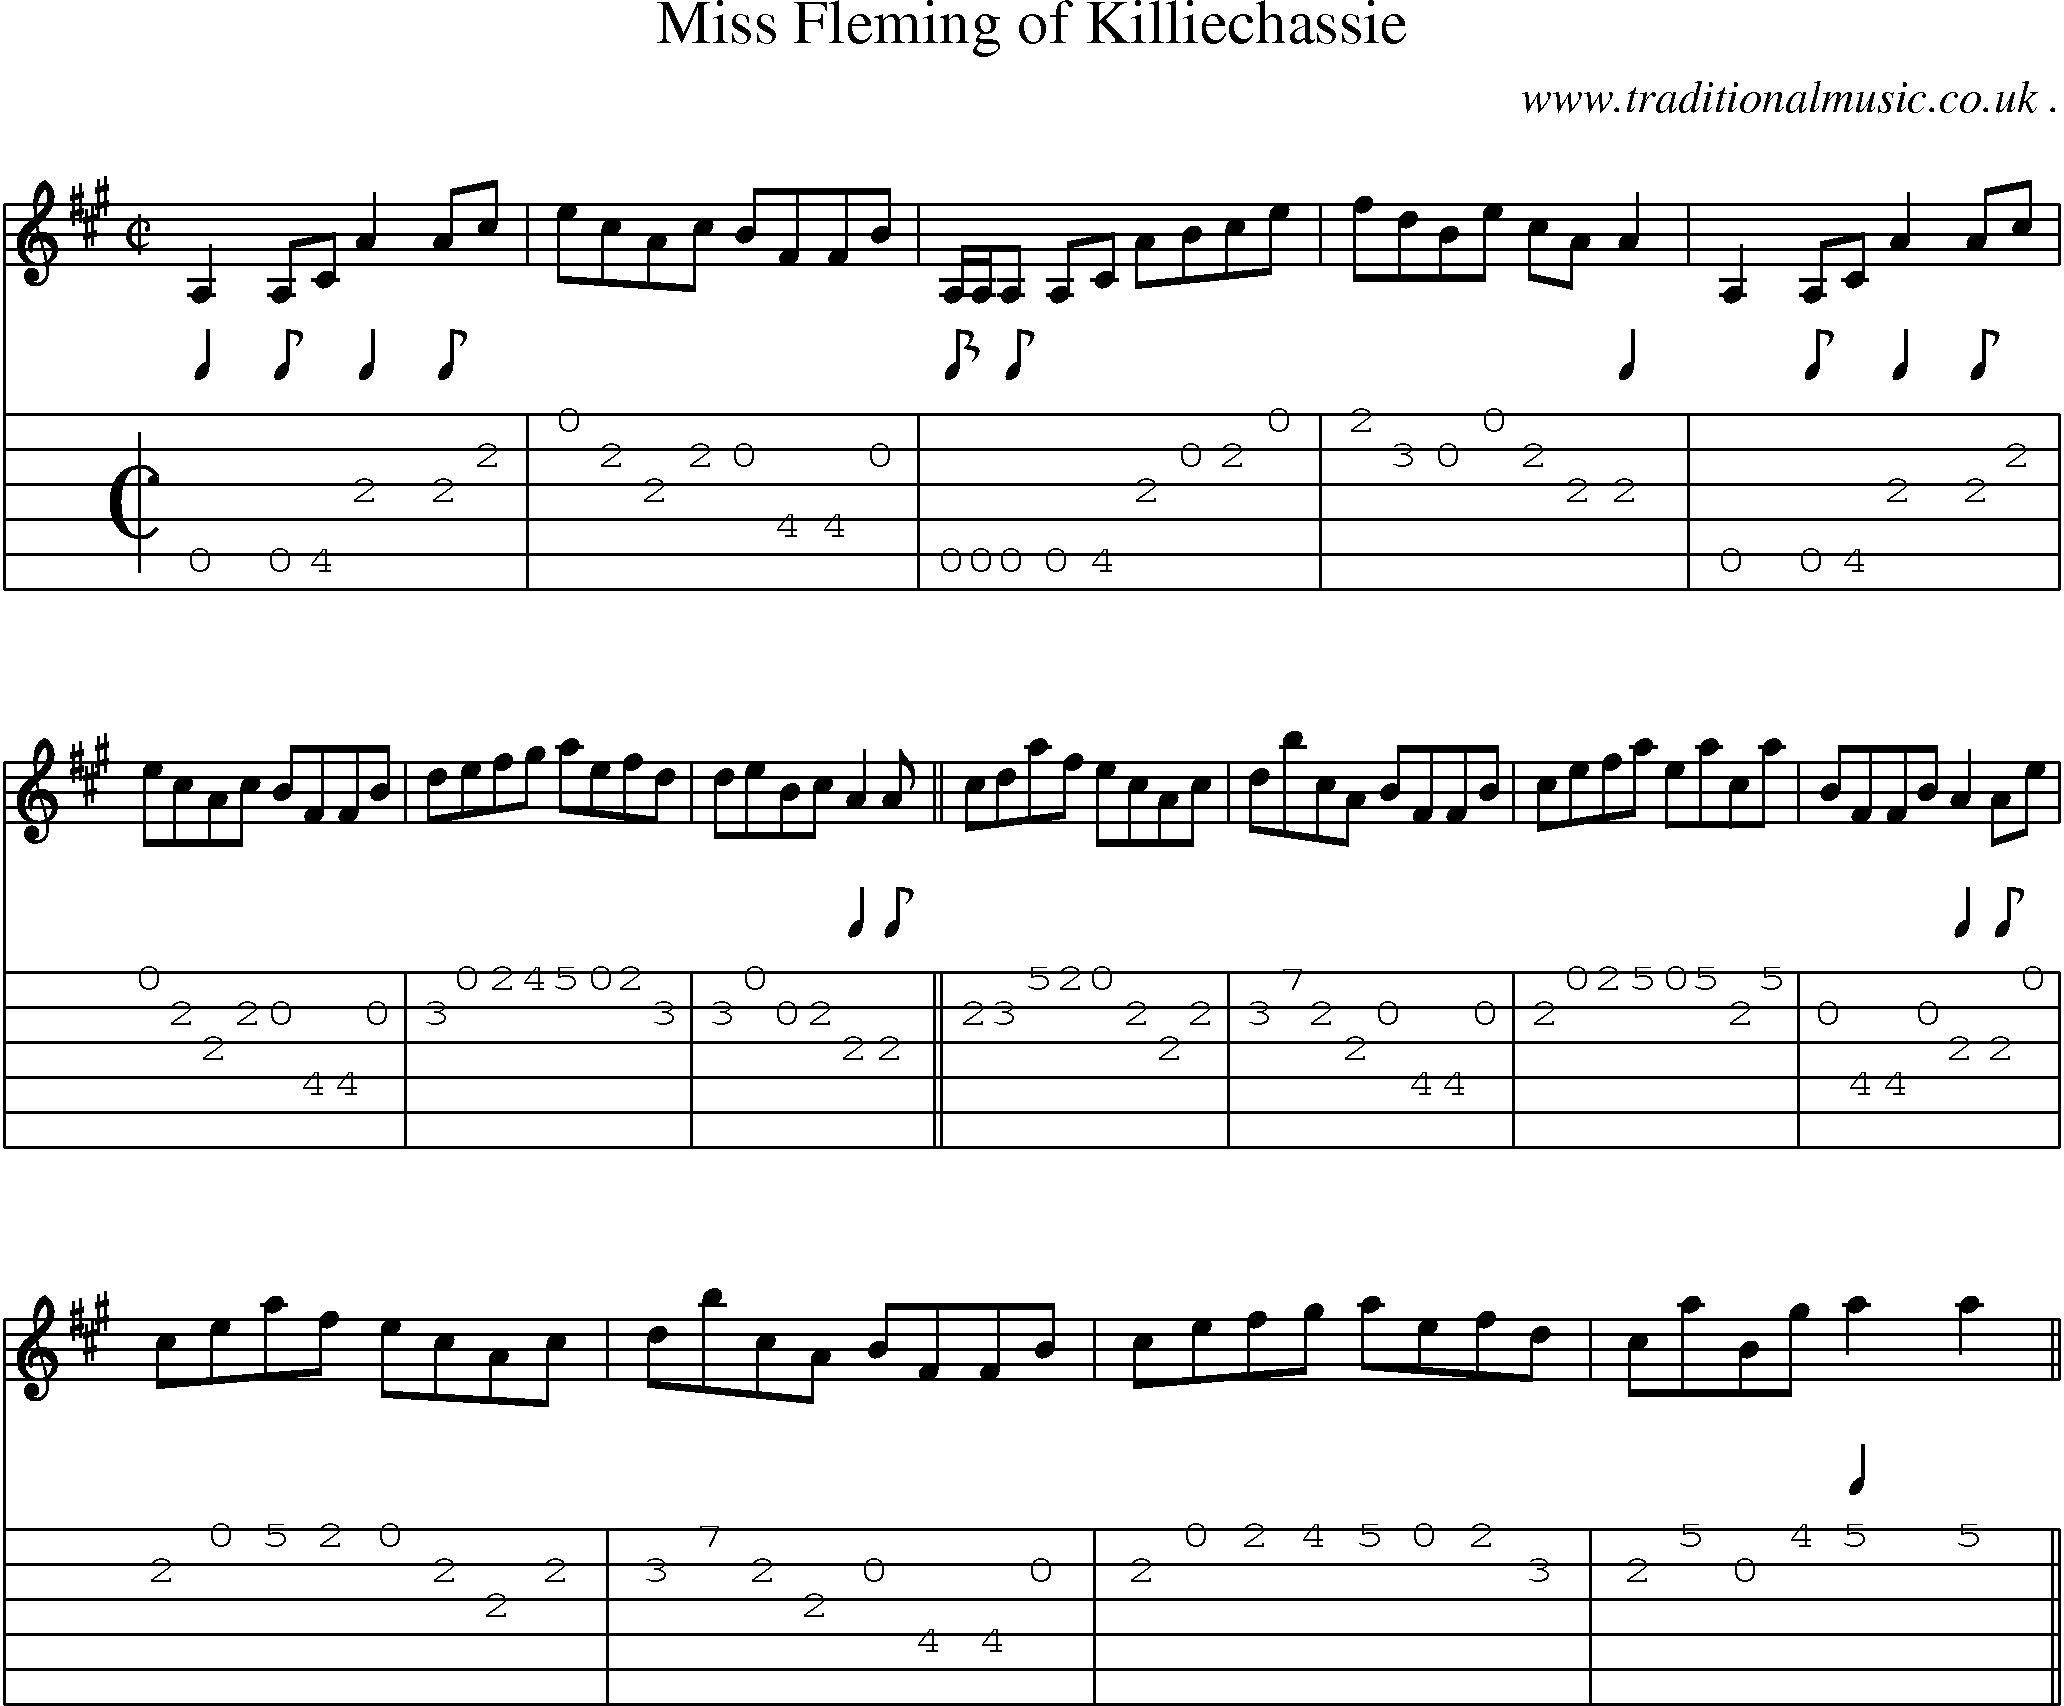 Sheet-music  score, Chords and Guitar Tabs for Miss Fleming Of Killiechassie